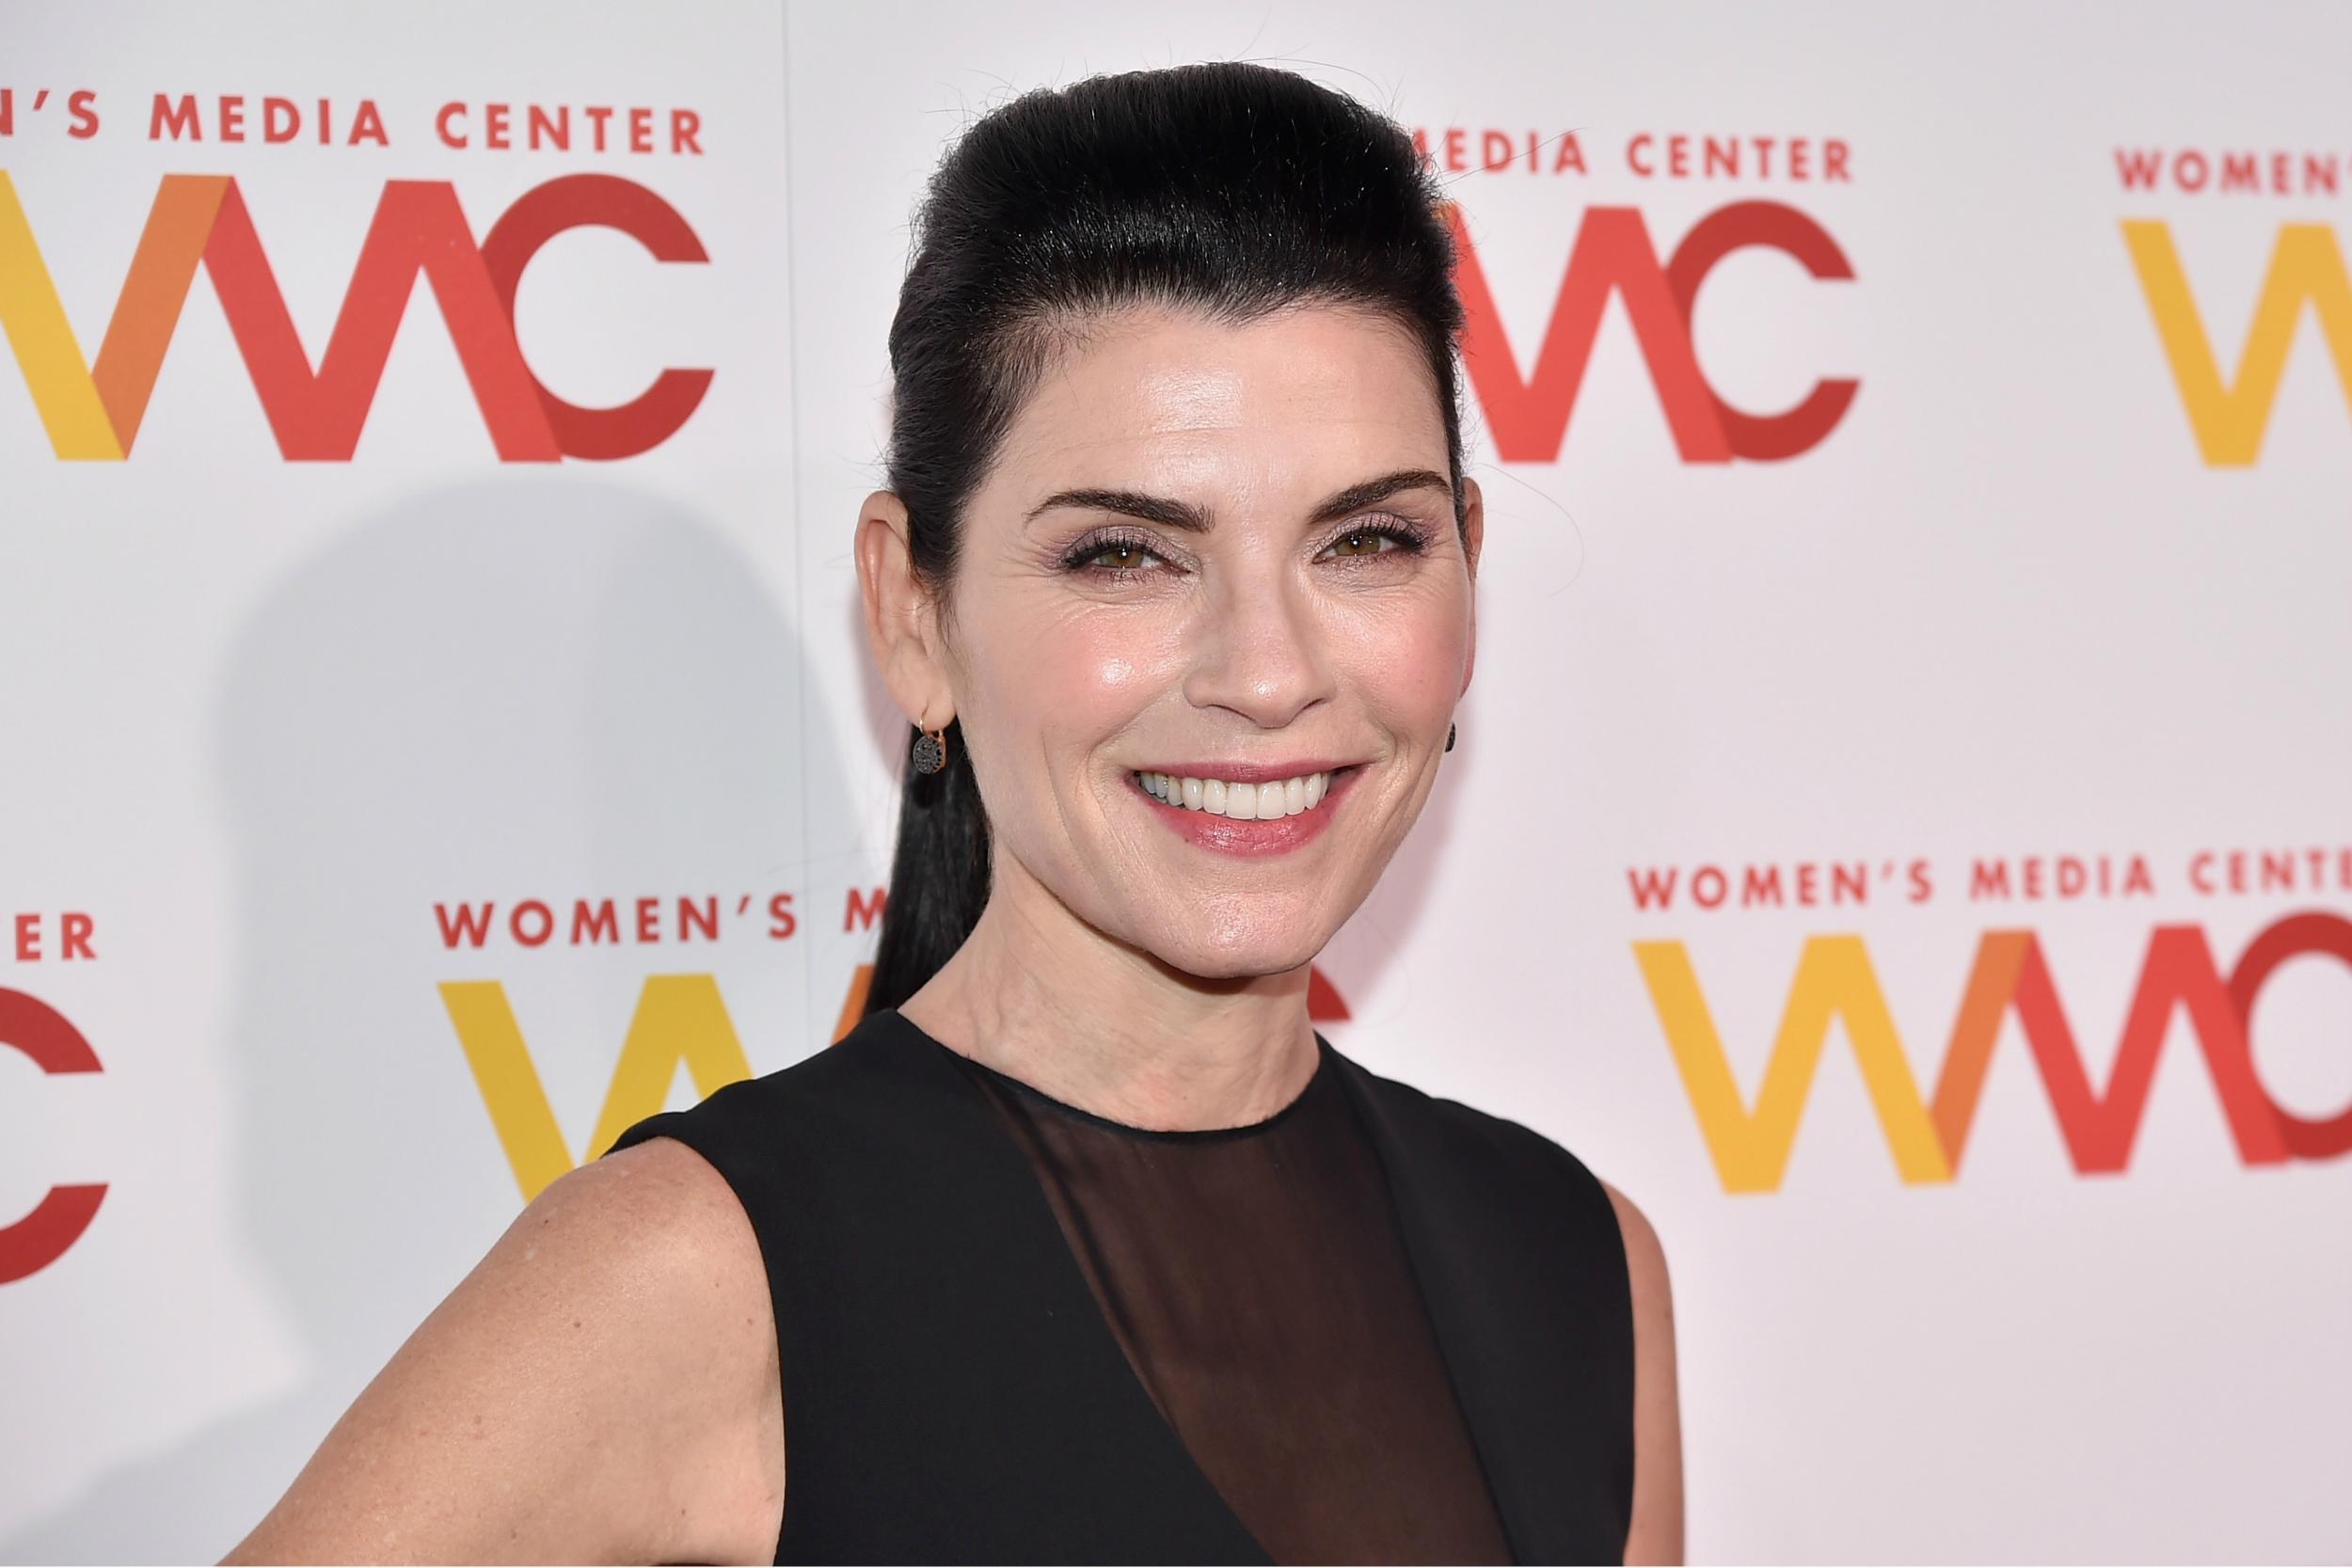 Julianna Margulies recounts experiences Harvey Weinstein and Steven Seagal The Independent The Independent photo